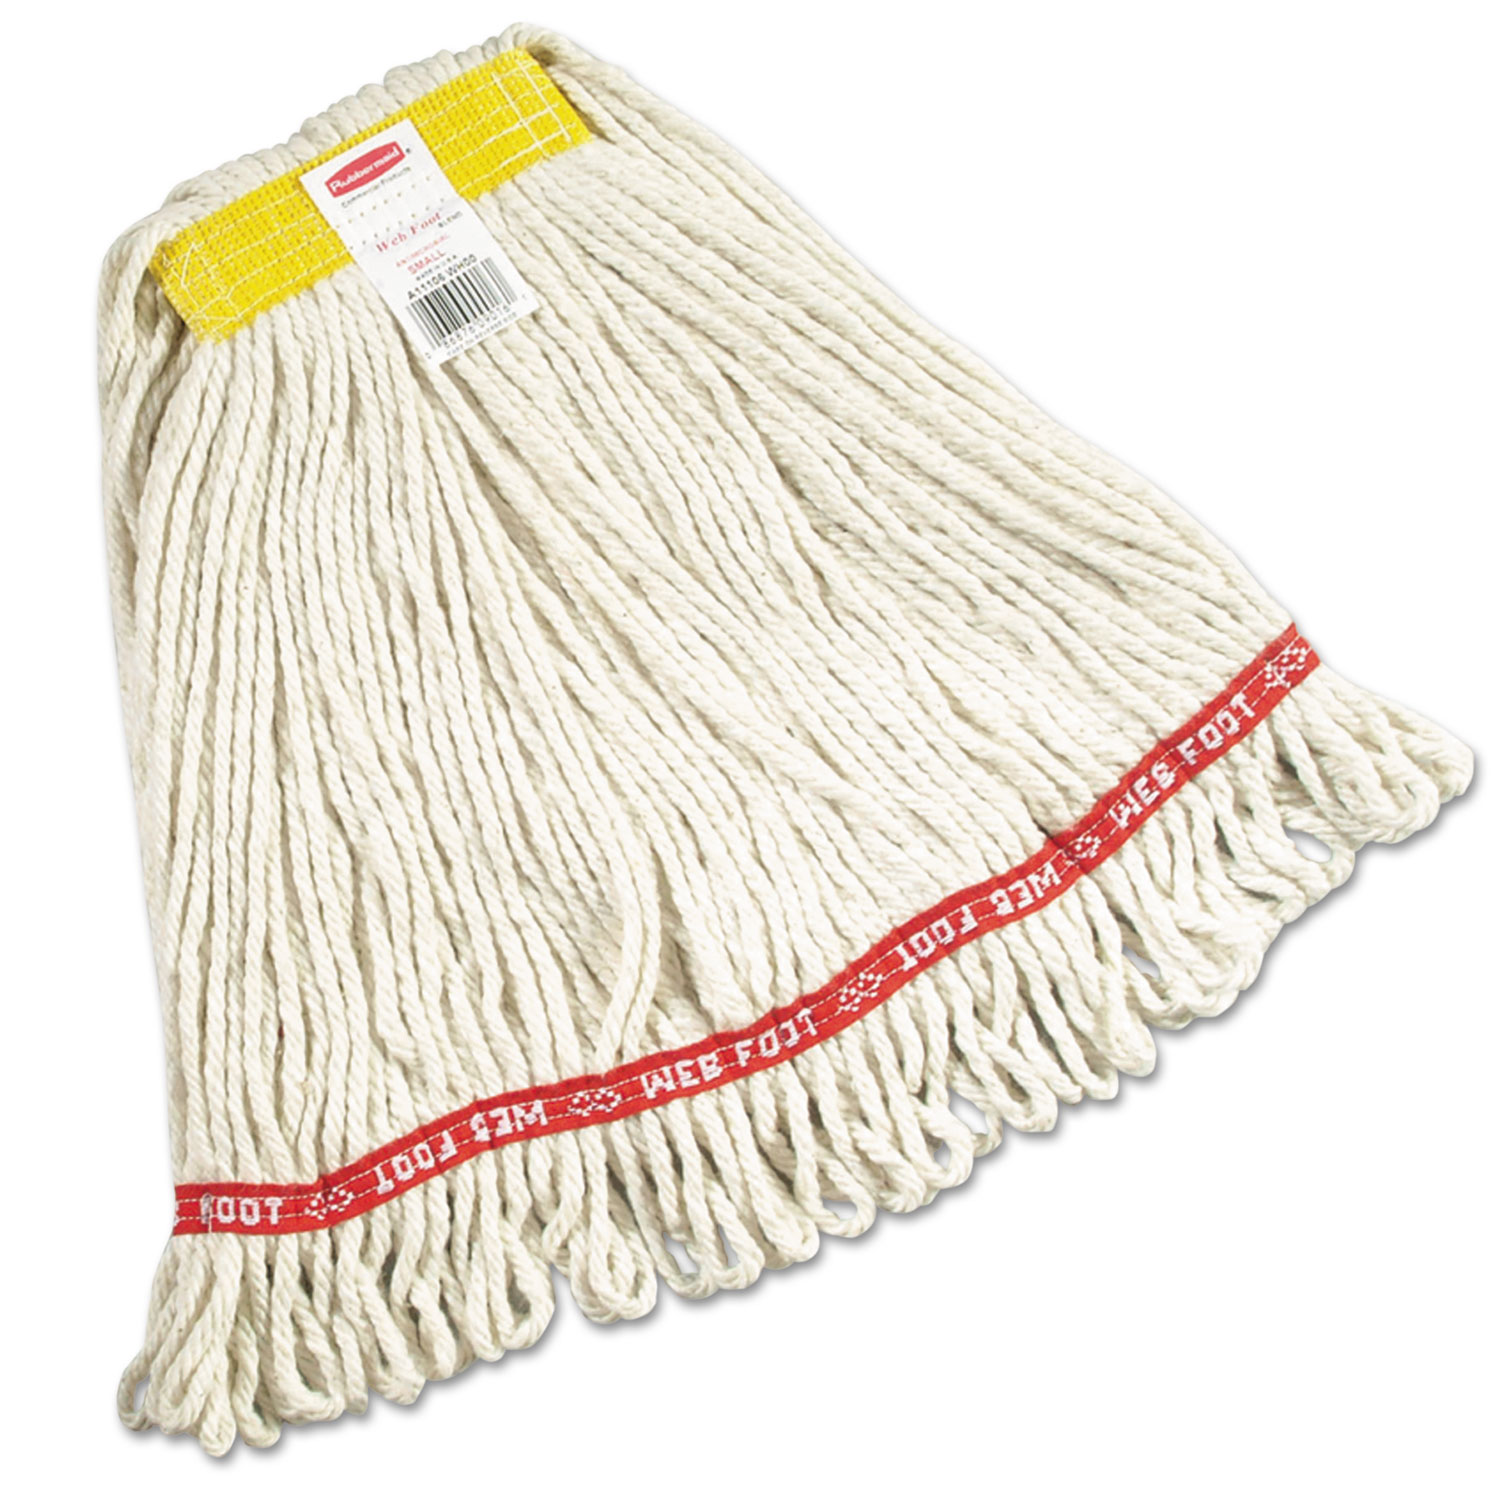 Web Foot Wet Mops, Cotton/Synthetic, White, Small, 1